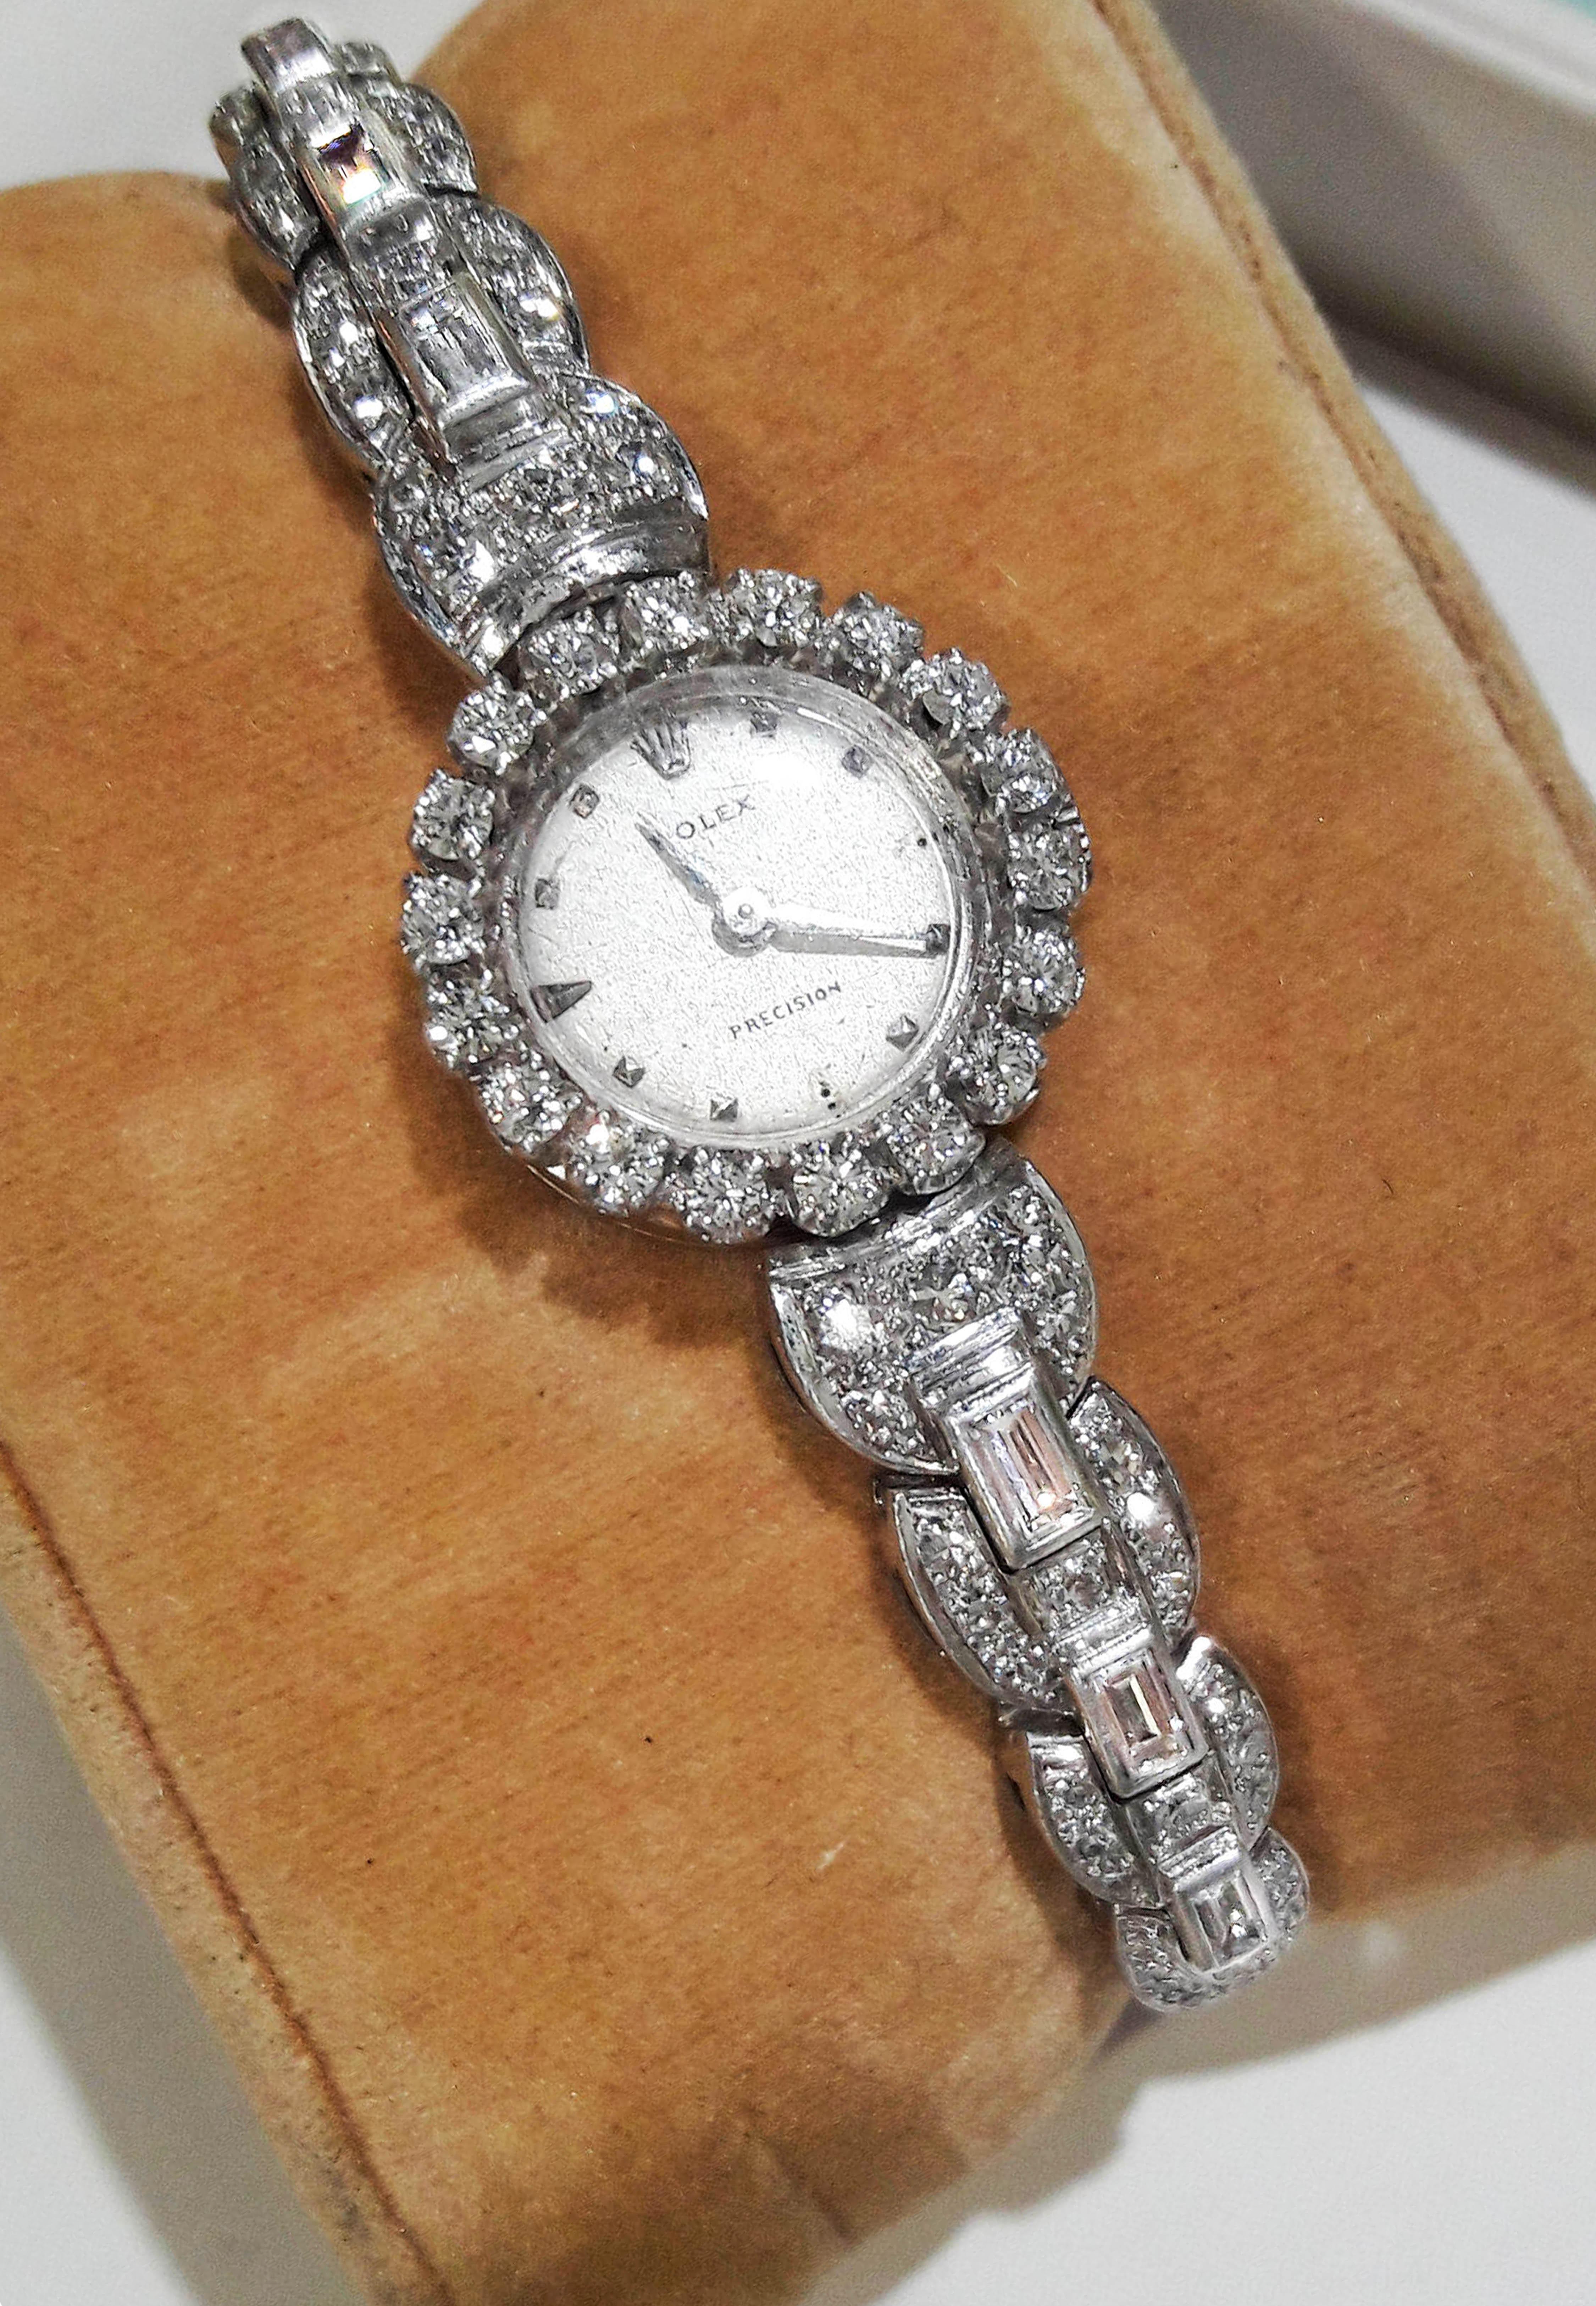 Dimensions
18mm X 18mm case size
*Fits up to 170mm wrist 
* Can be resized as complimentary service if  needed
*Fully signed Dial , Case, Movement & Clasp
 
The present watch is a sophisticated rare, fully signed 1950s 18kt White Gold Rolex baguette